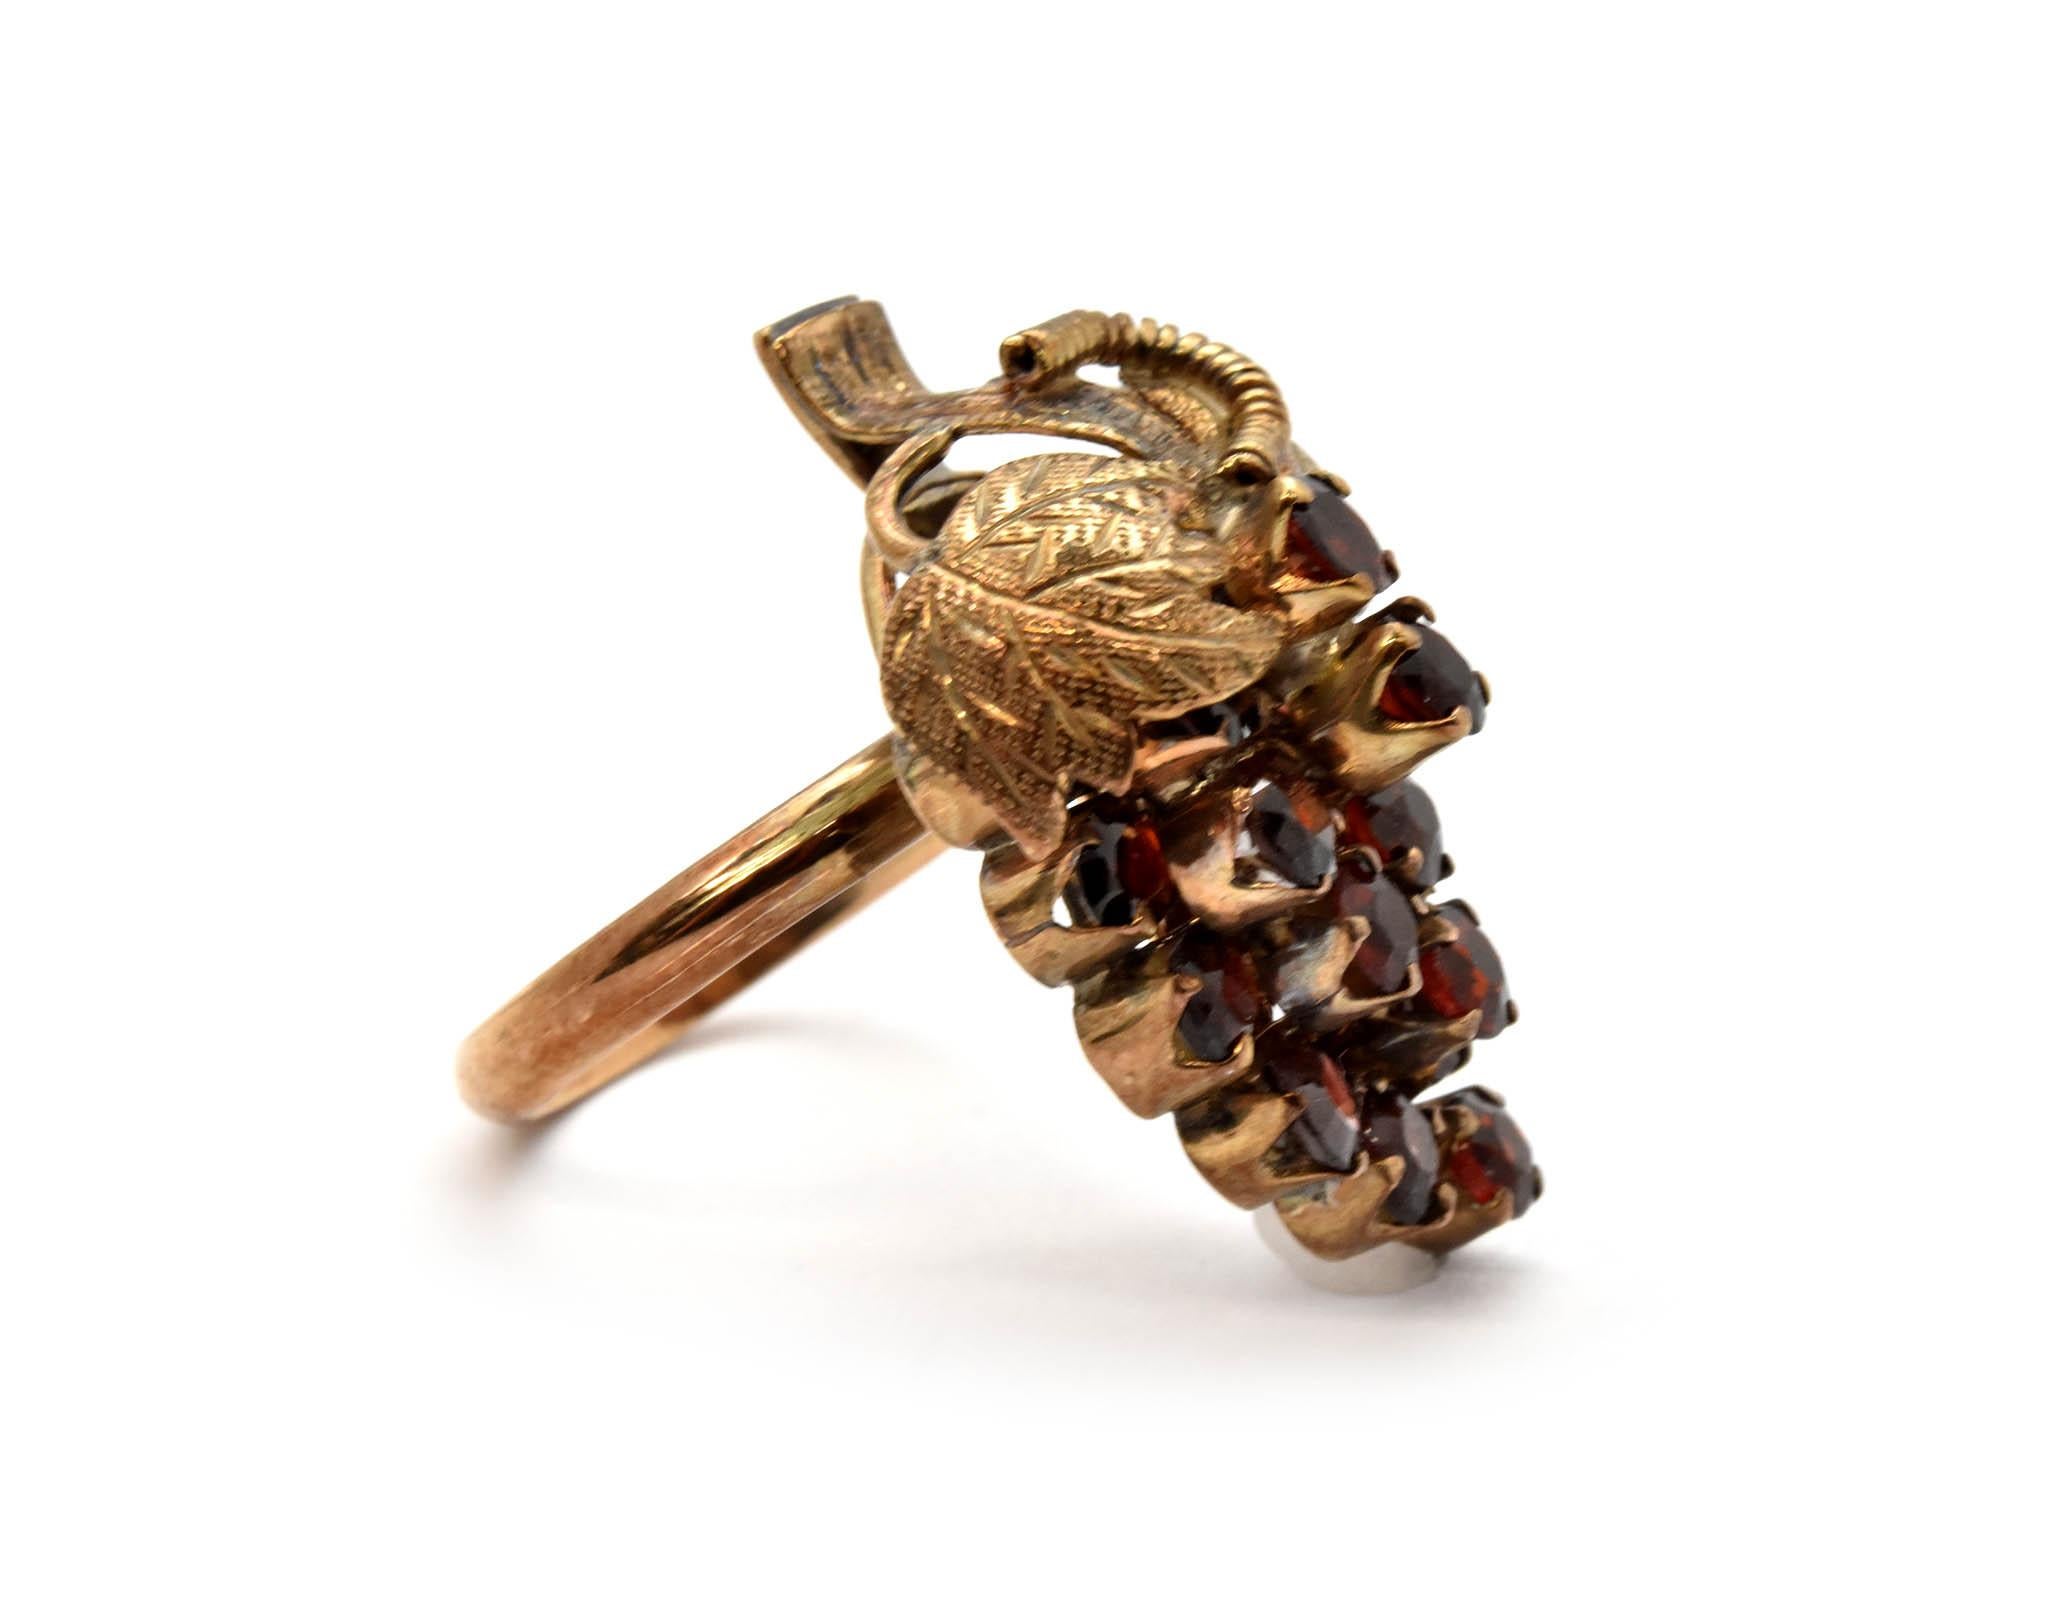 This fun ring is made in 14k yellow gold, and it features round red garnets in a grape bunch formation. The ring measures 27x19mm, and it weighs 4.9 grams. The ring is a size 5.5.